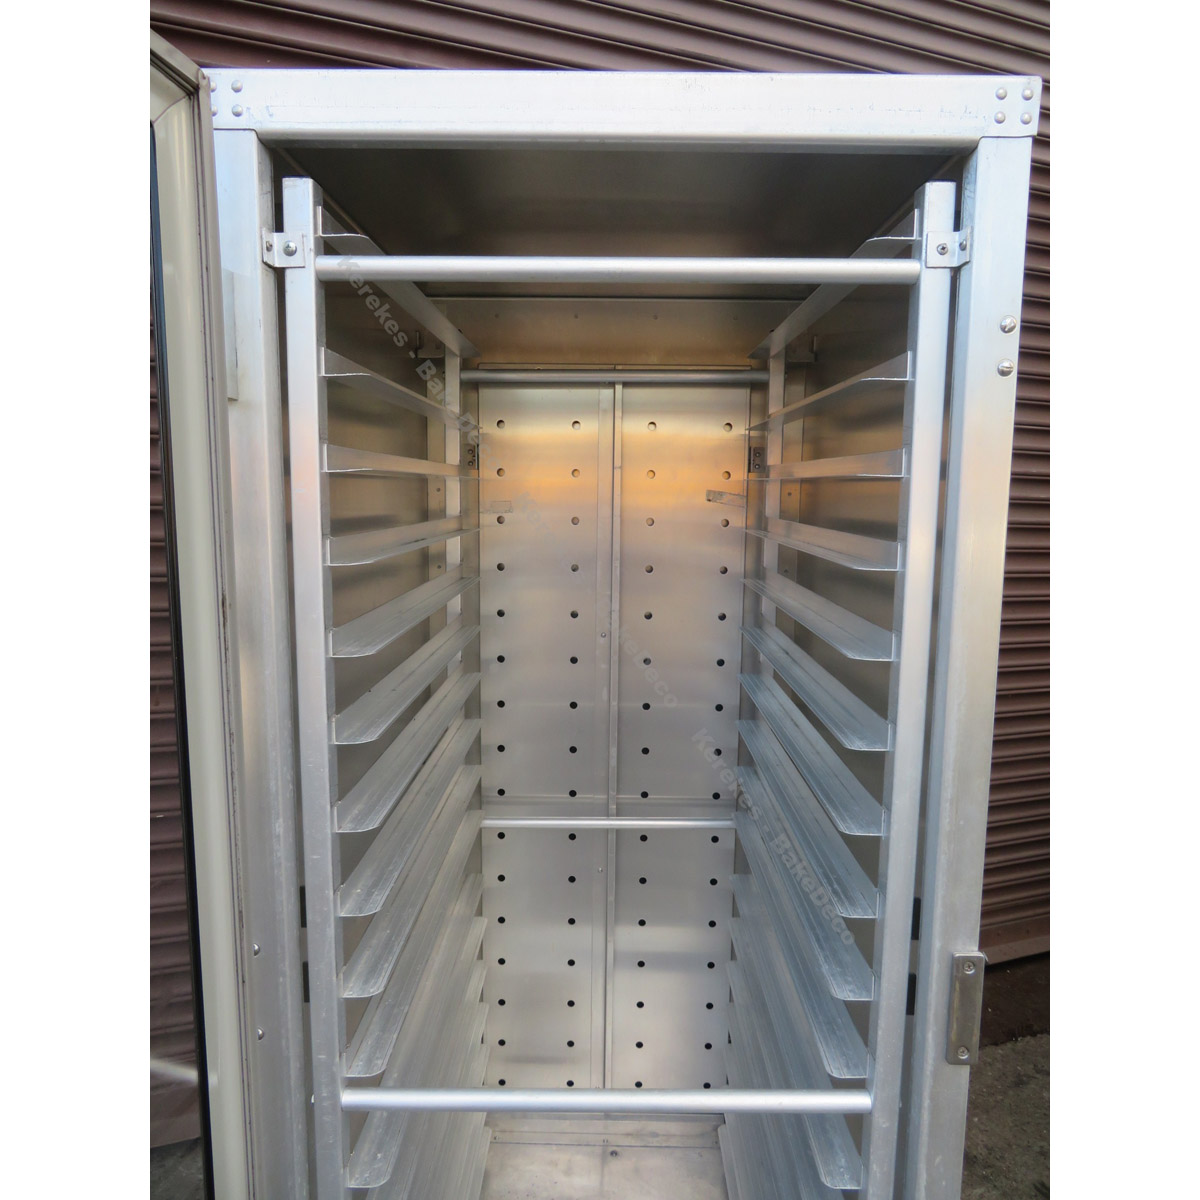 Metro Combination CM2000 Uninsulated Proofing/Holding Cabinet, Used Great Condition image 2